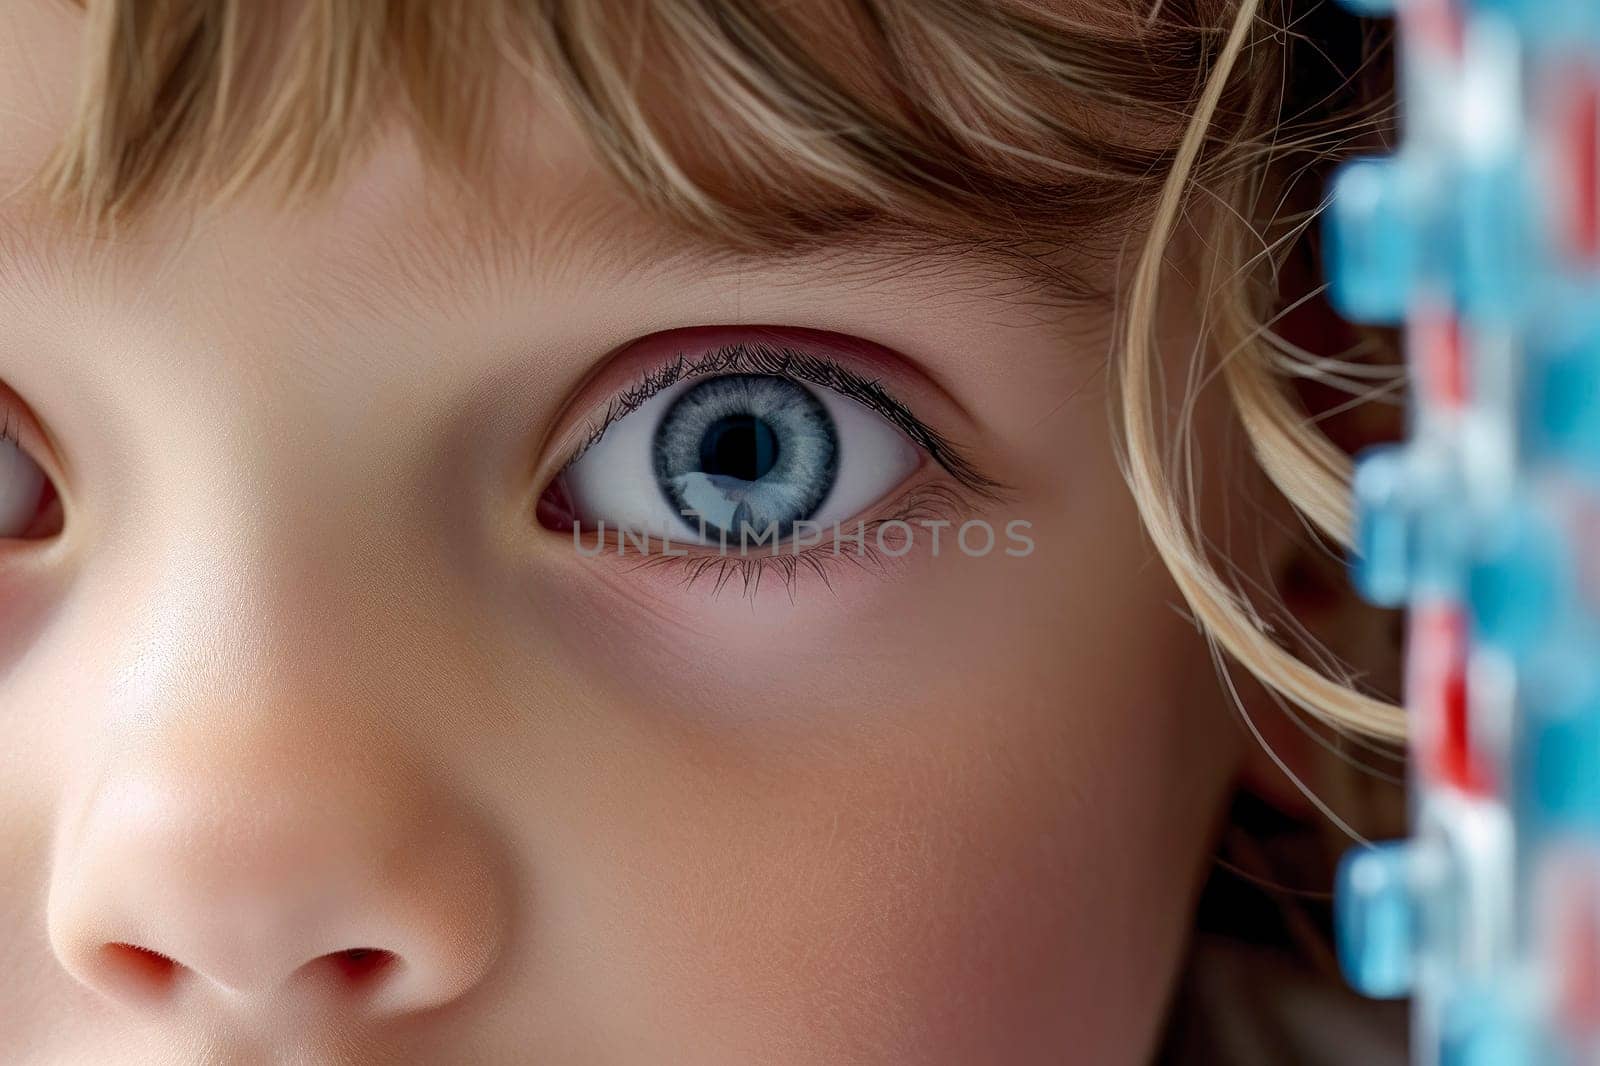 Captivating Blue-eyed Child: Innocence and Wonder by pippocarlot